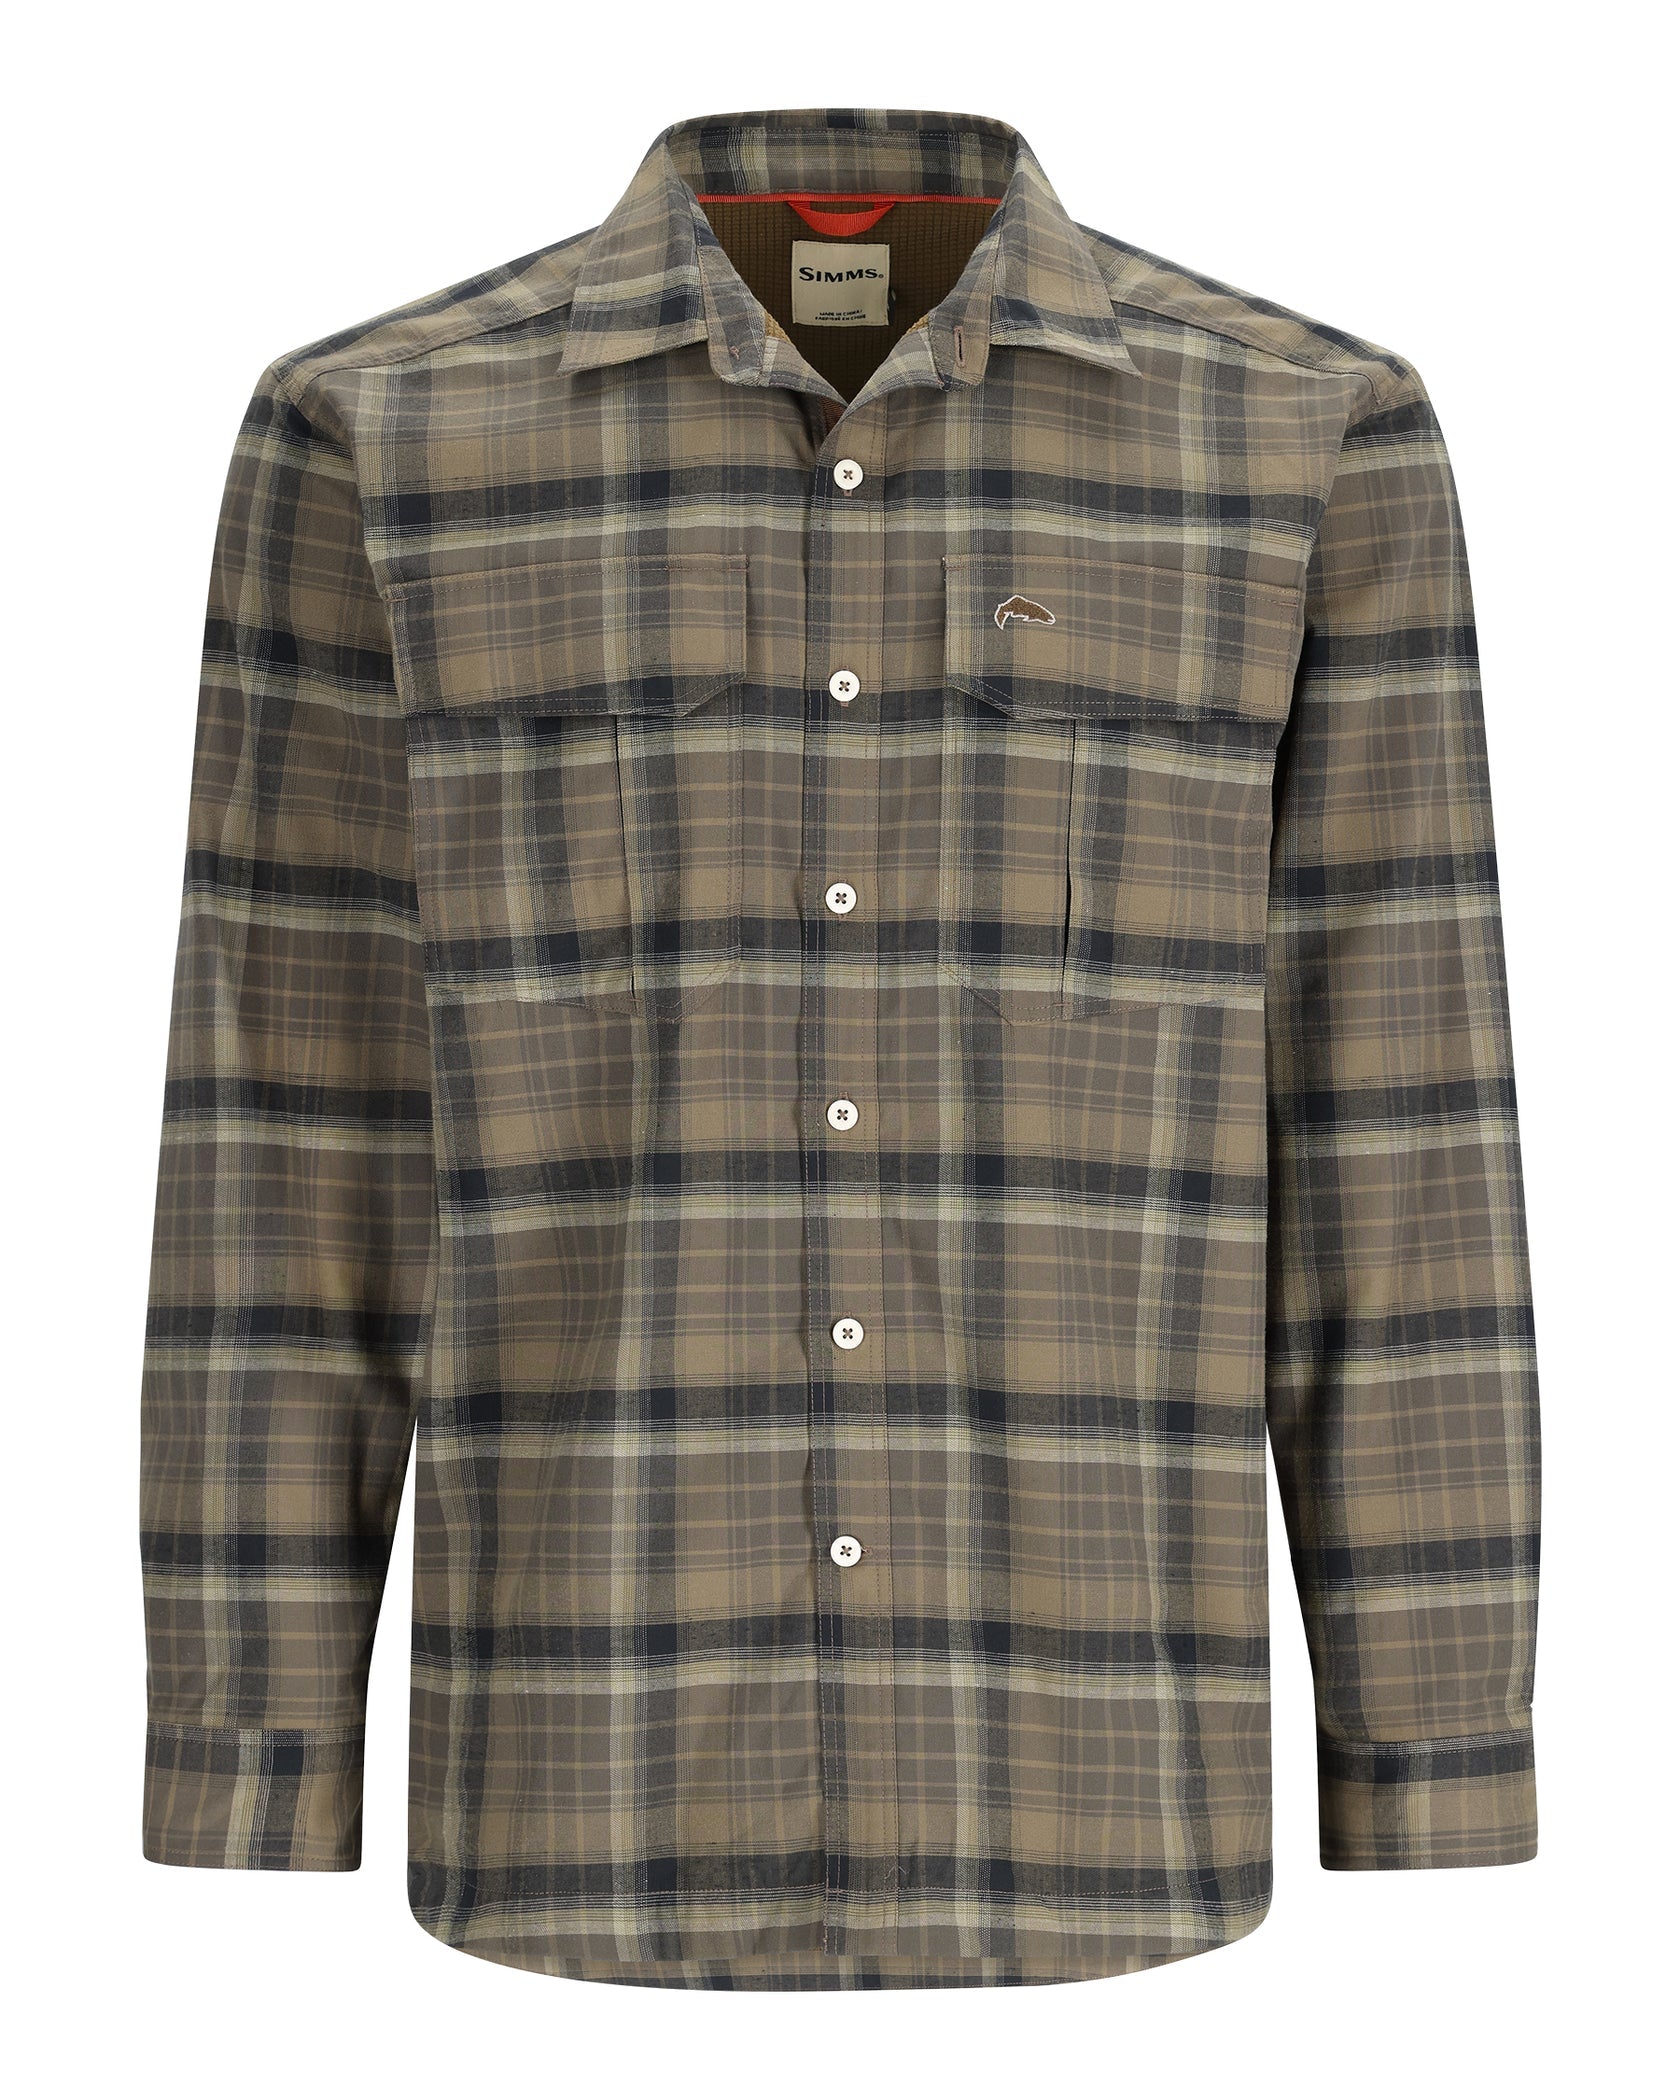 Simms ColdWeather Long Sleeve Shirt Men's Hickory Asym Ombre Plaid / L